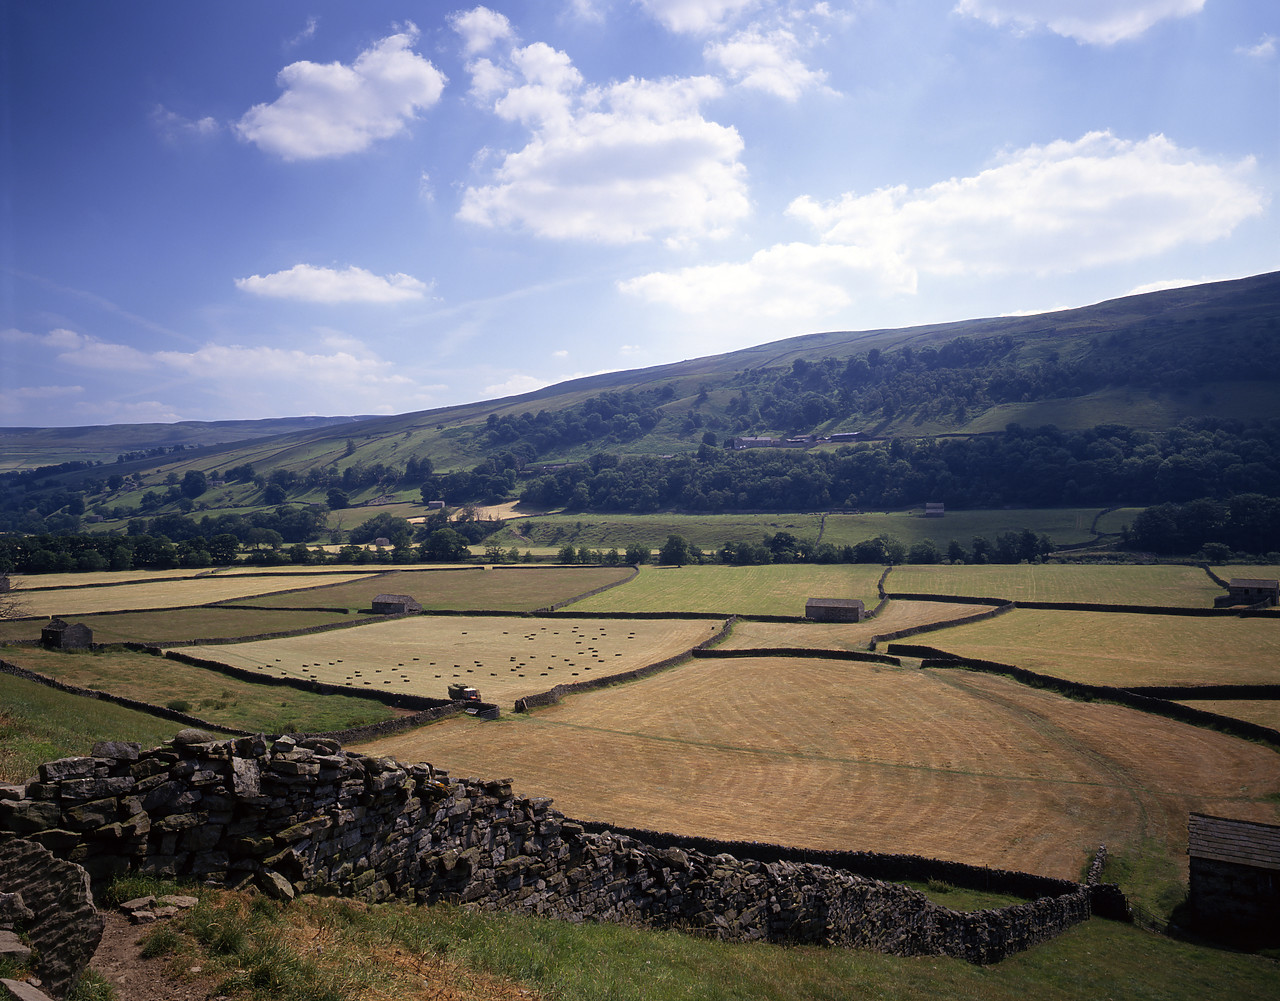 #944616-1 - View over Swaledale, Gunnerside, North Yorkshire, England